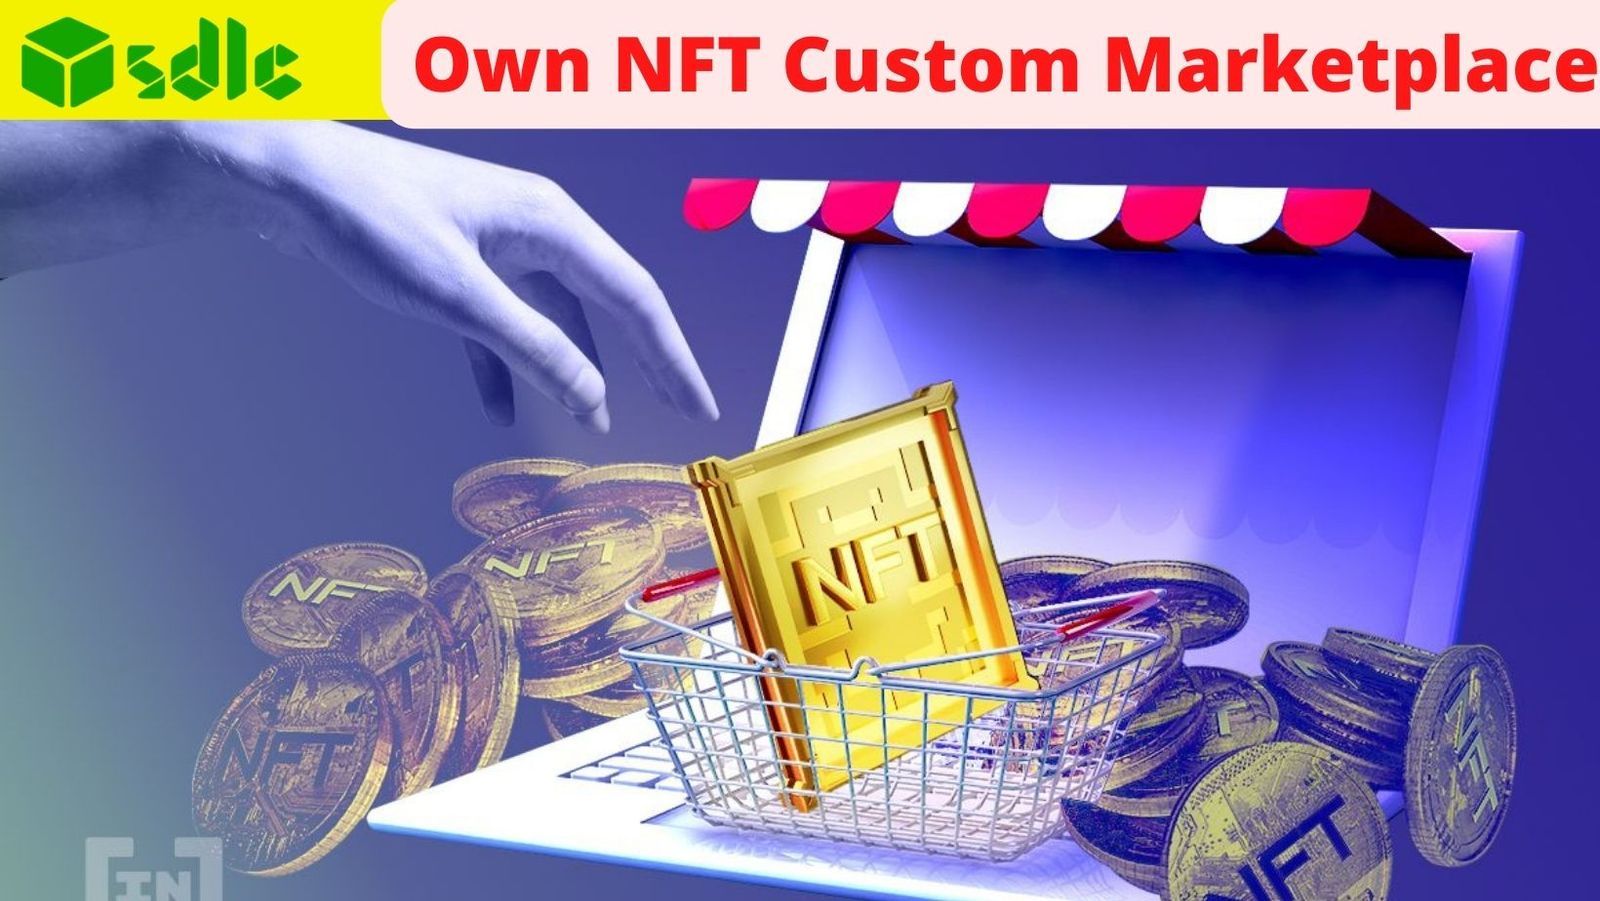 How to Create Your Own NFT Custom Marketplace?